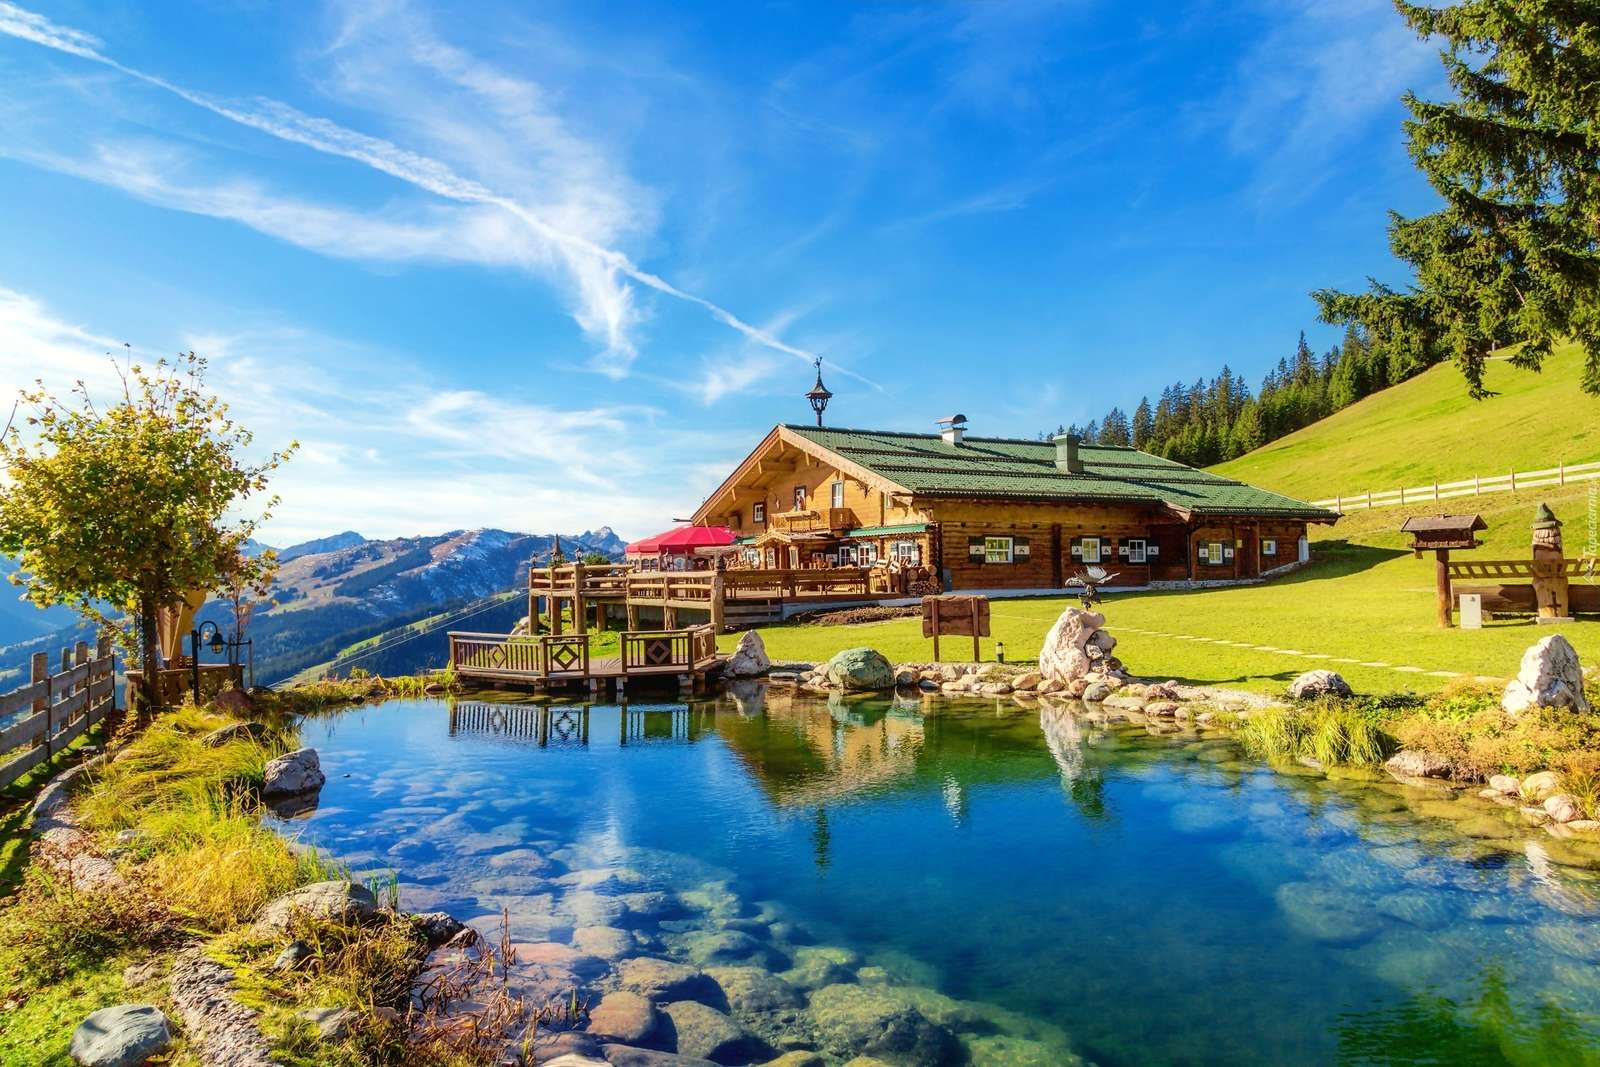 House in the mountains. jigsaw puzzle online